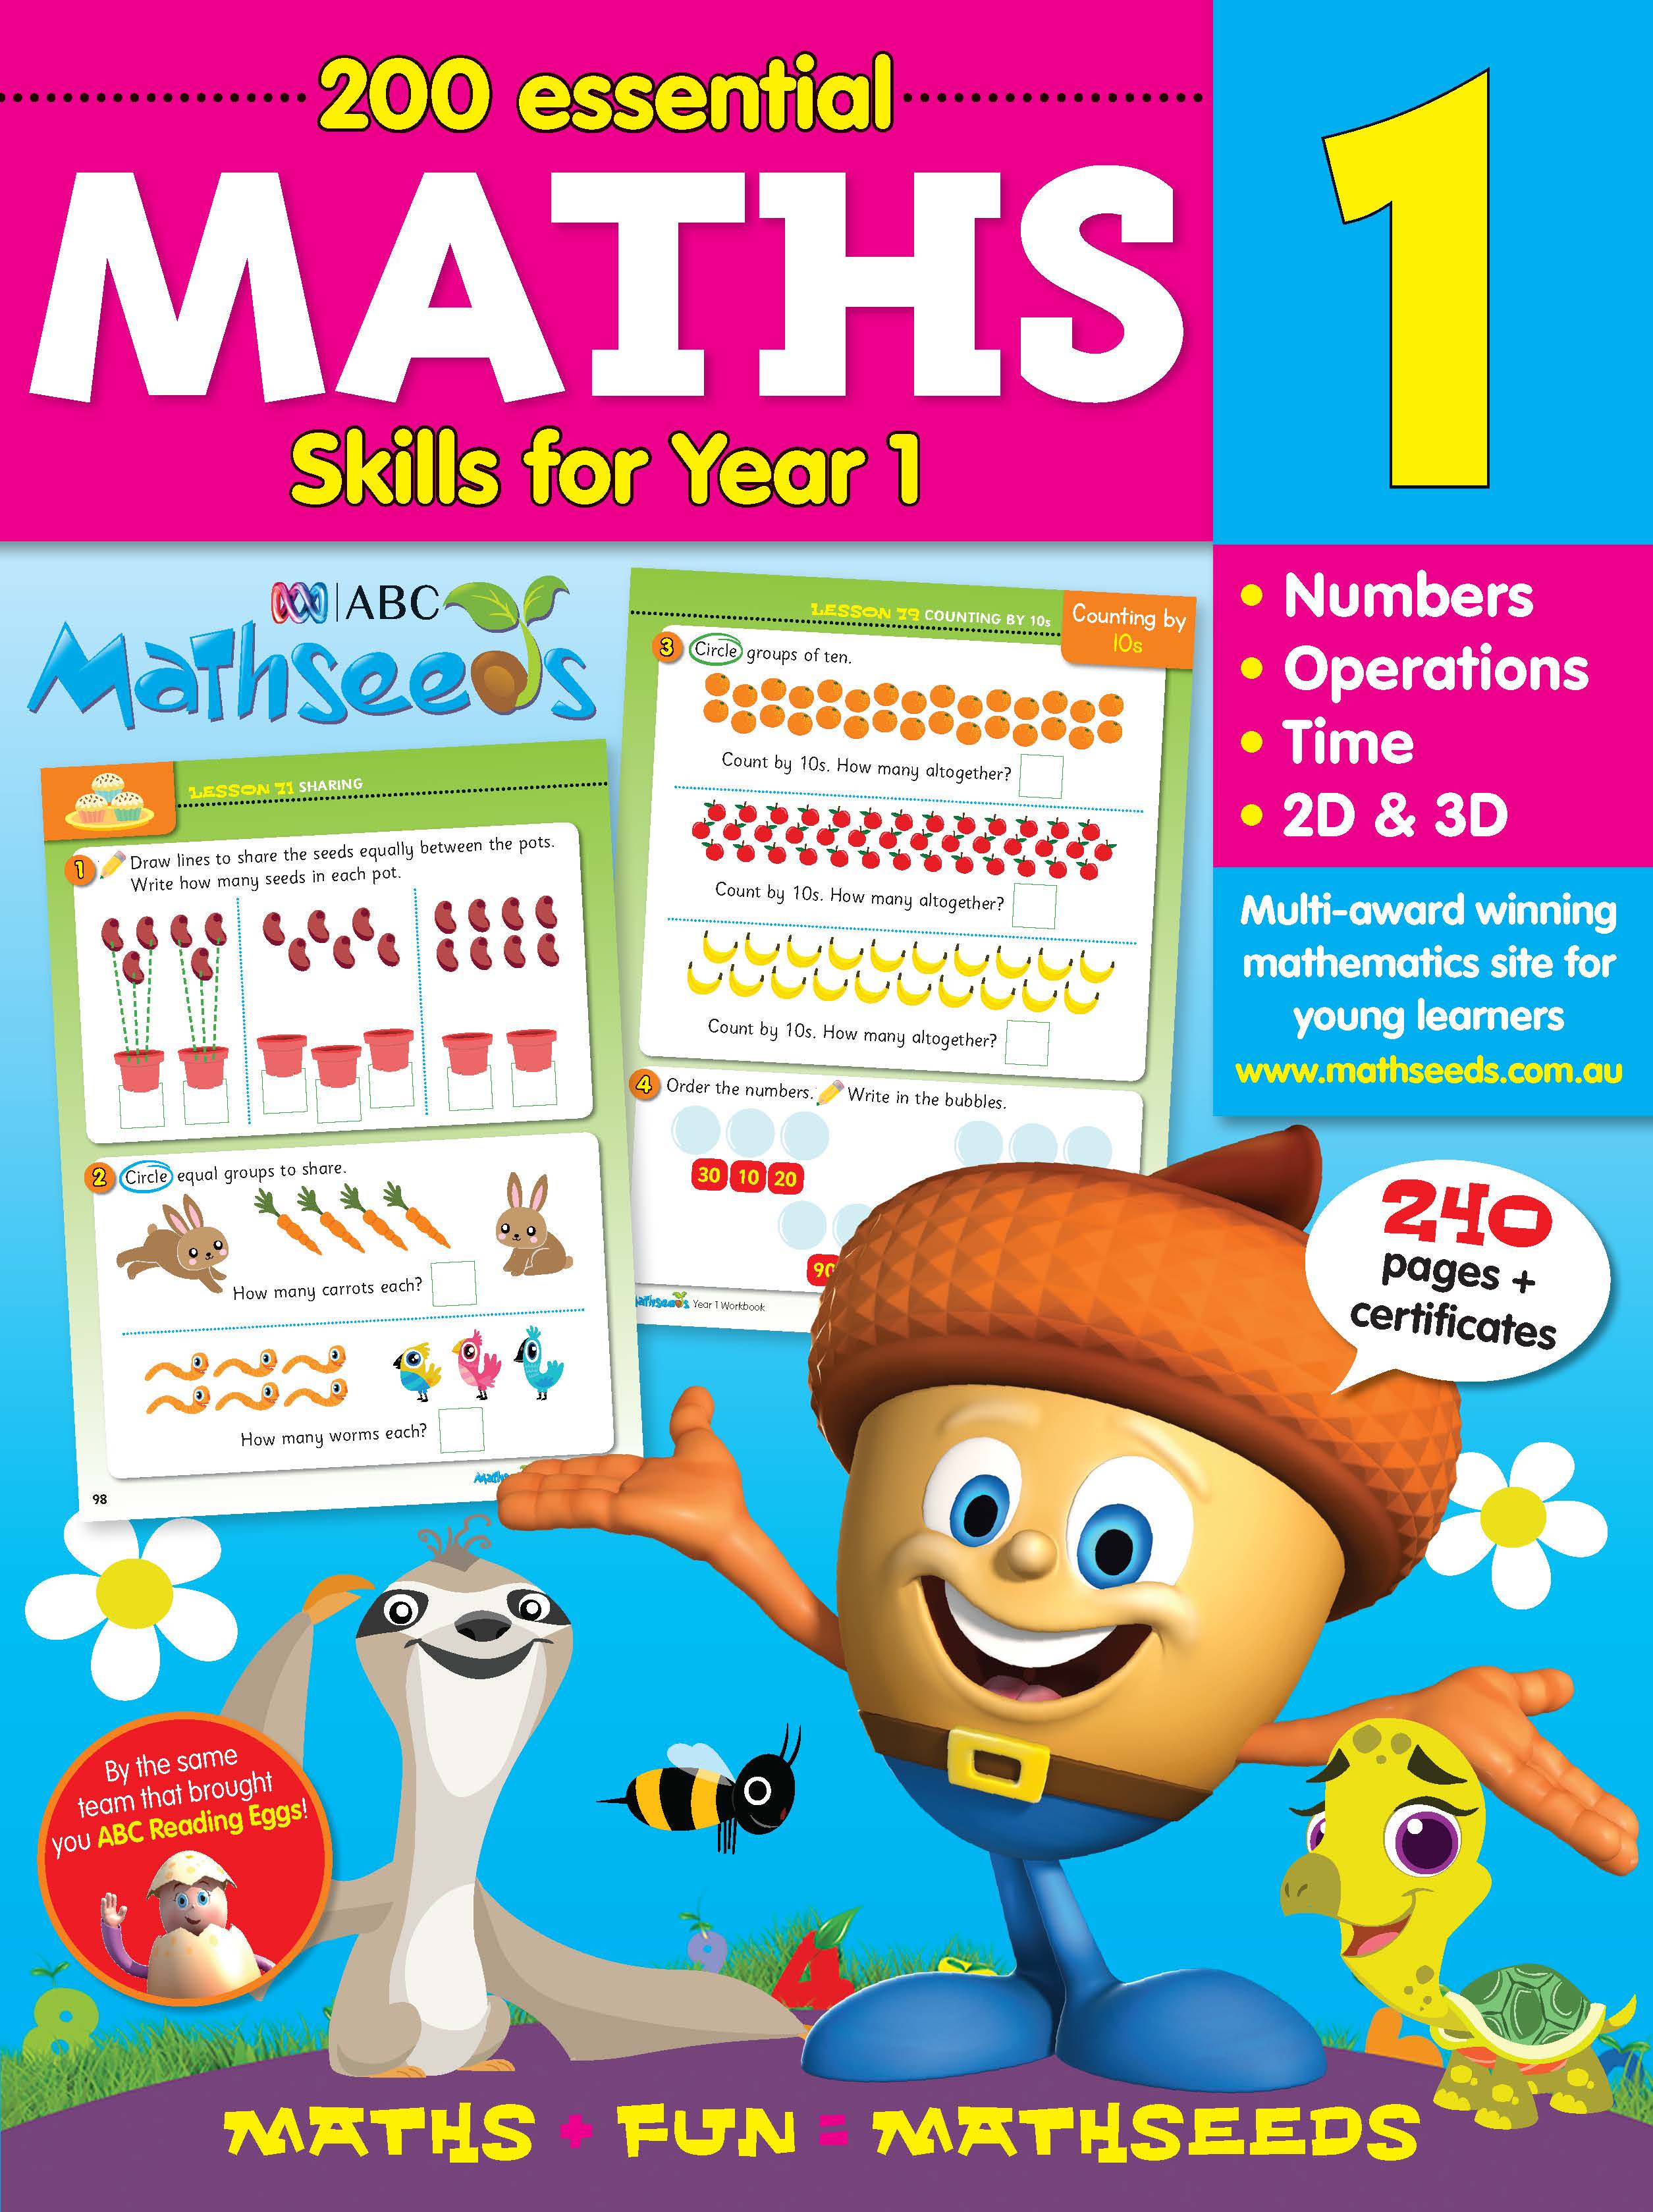 Picture of ABC Mathseeds Maths Skills for Year 1